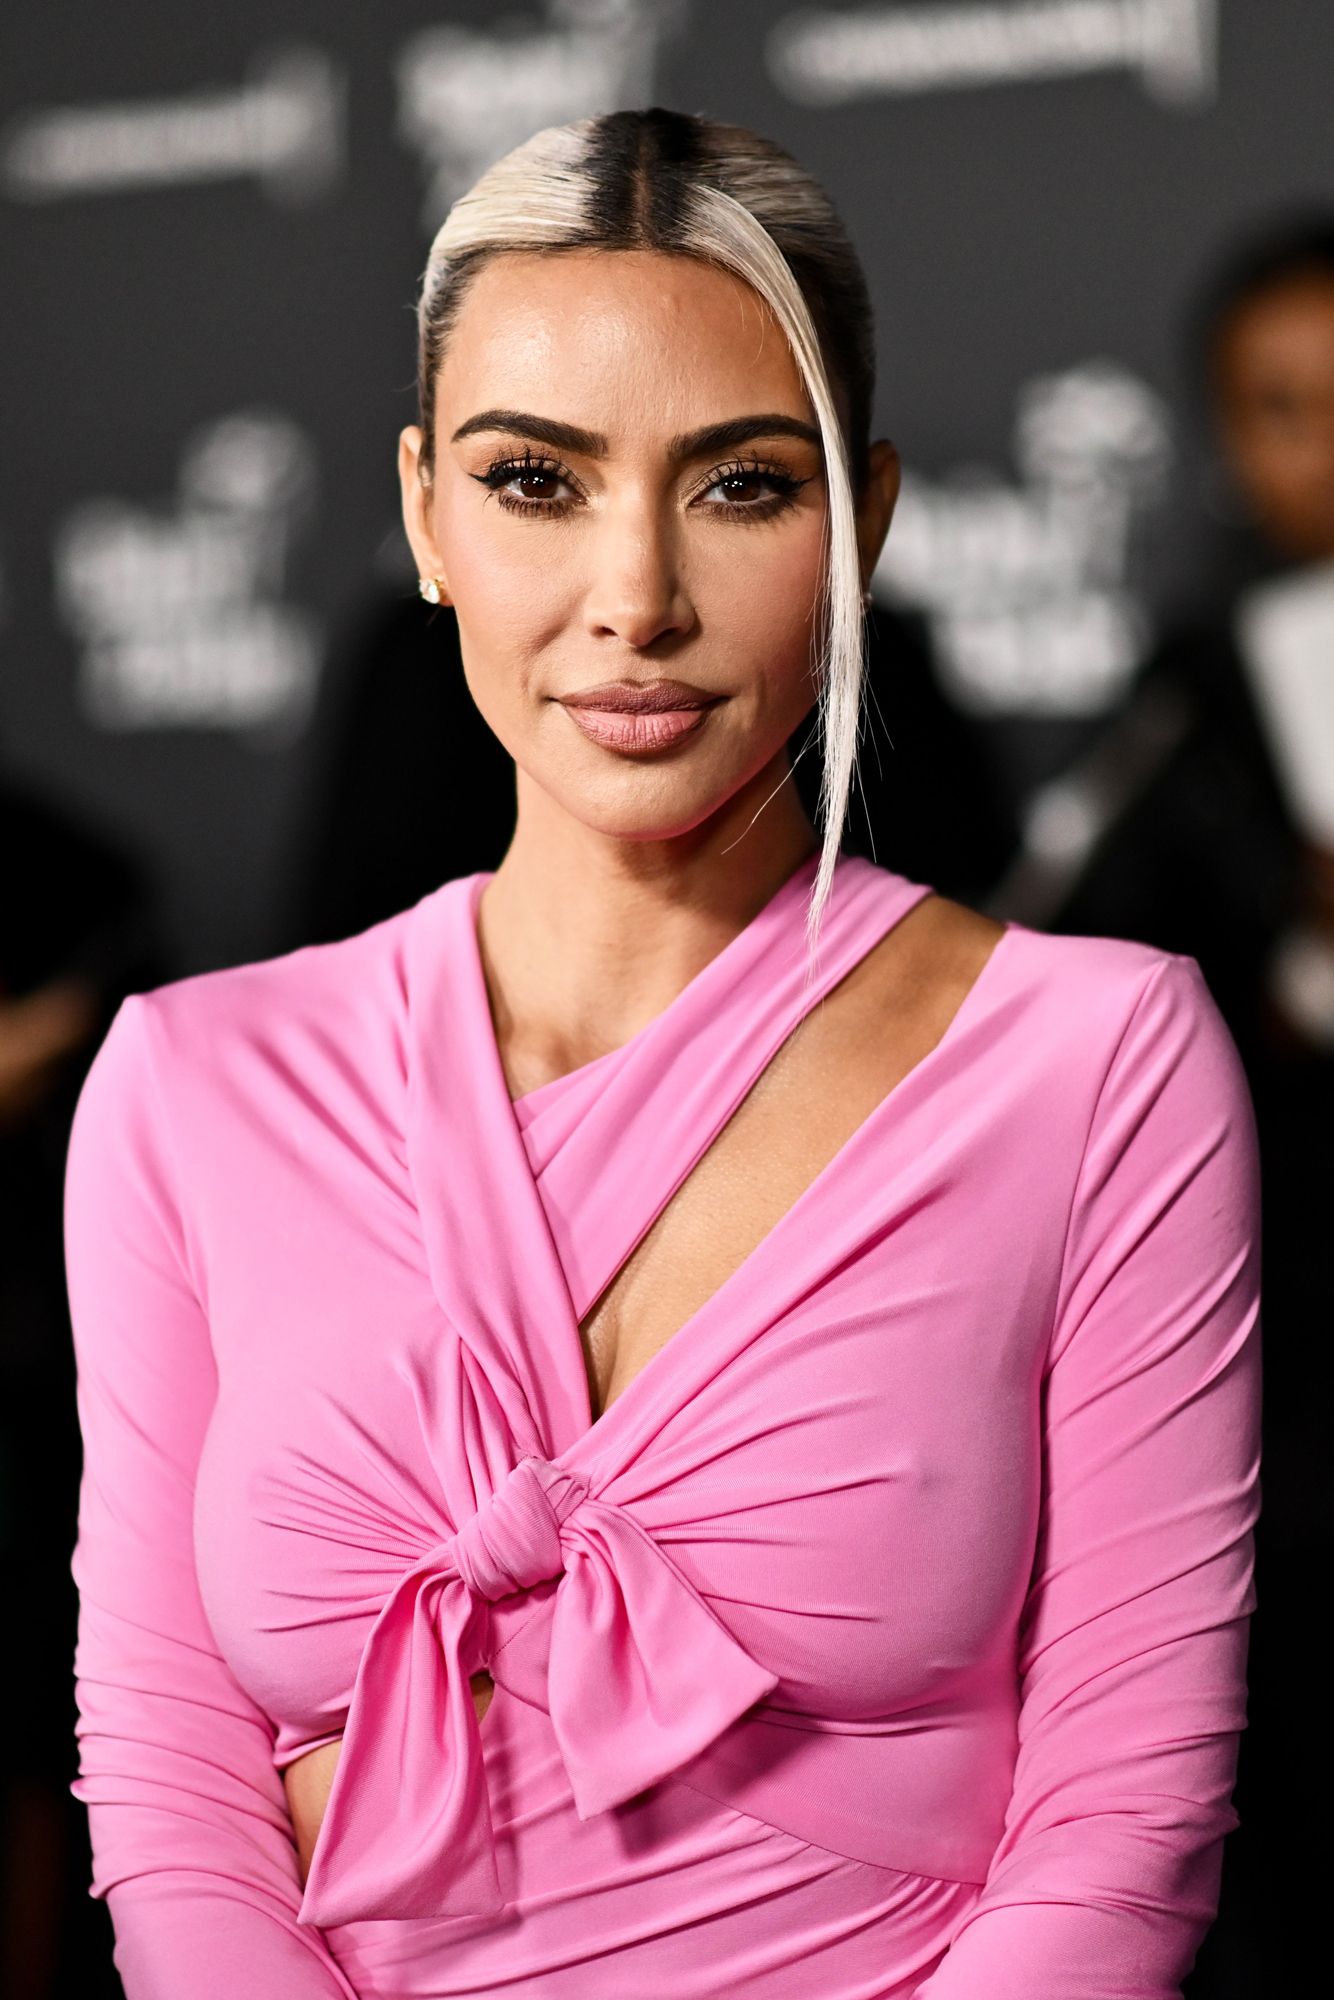 Kim Kardashian Opens Up About Dealing With Pee Anxiety Over the Years Explains Why She Travels With a Cup and Wet Wipes